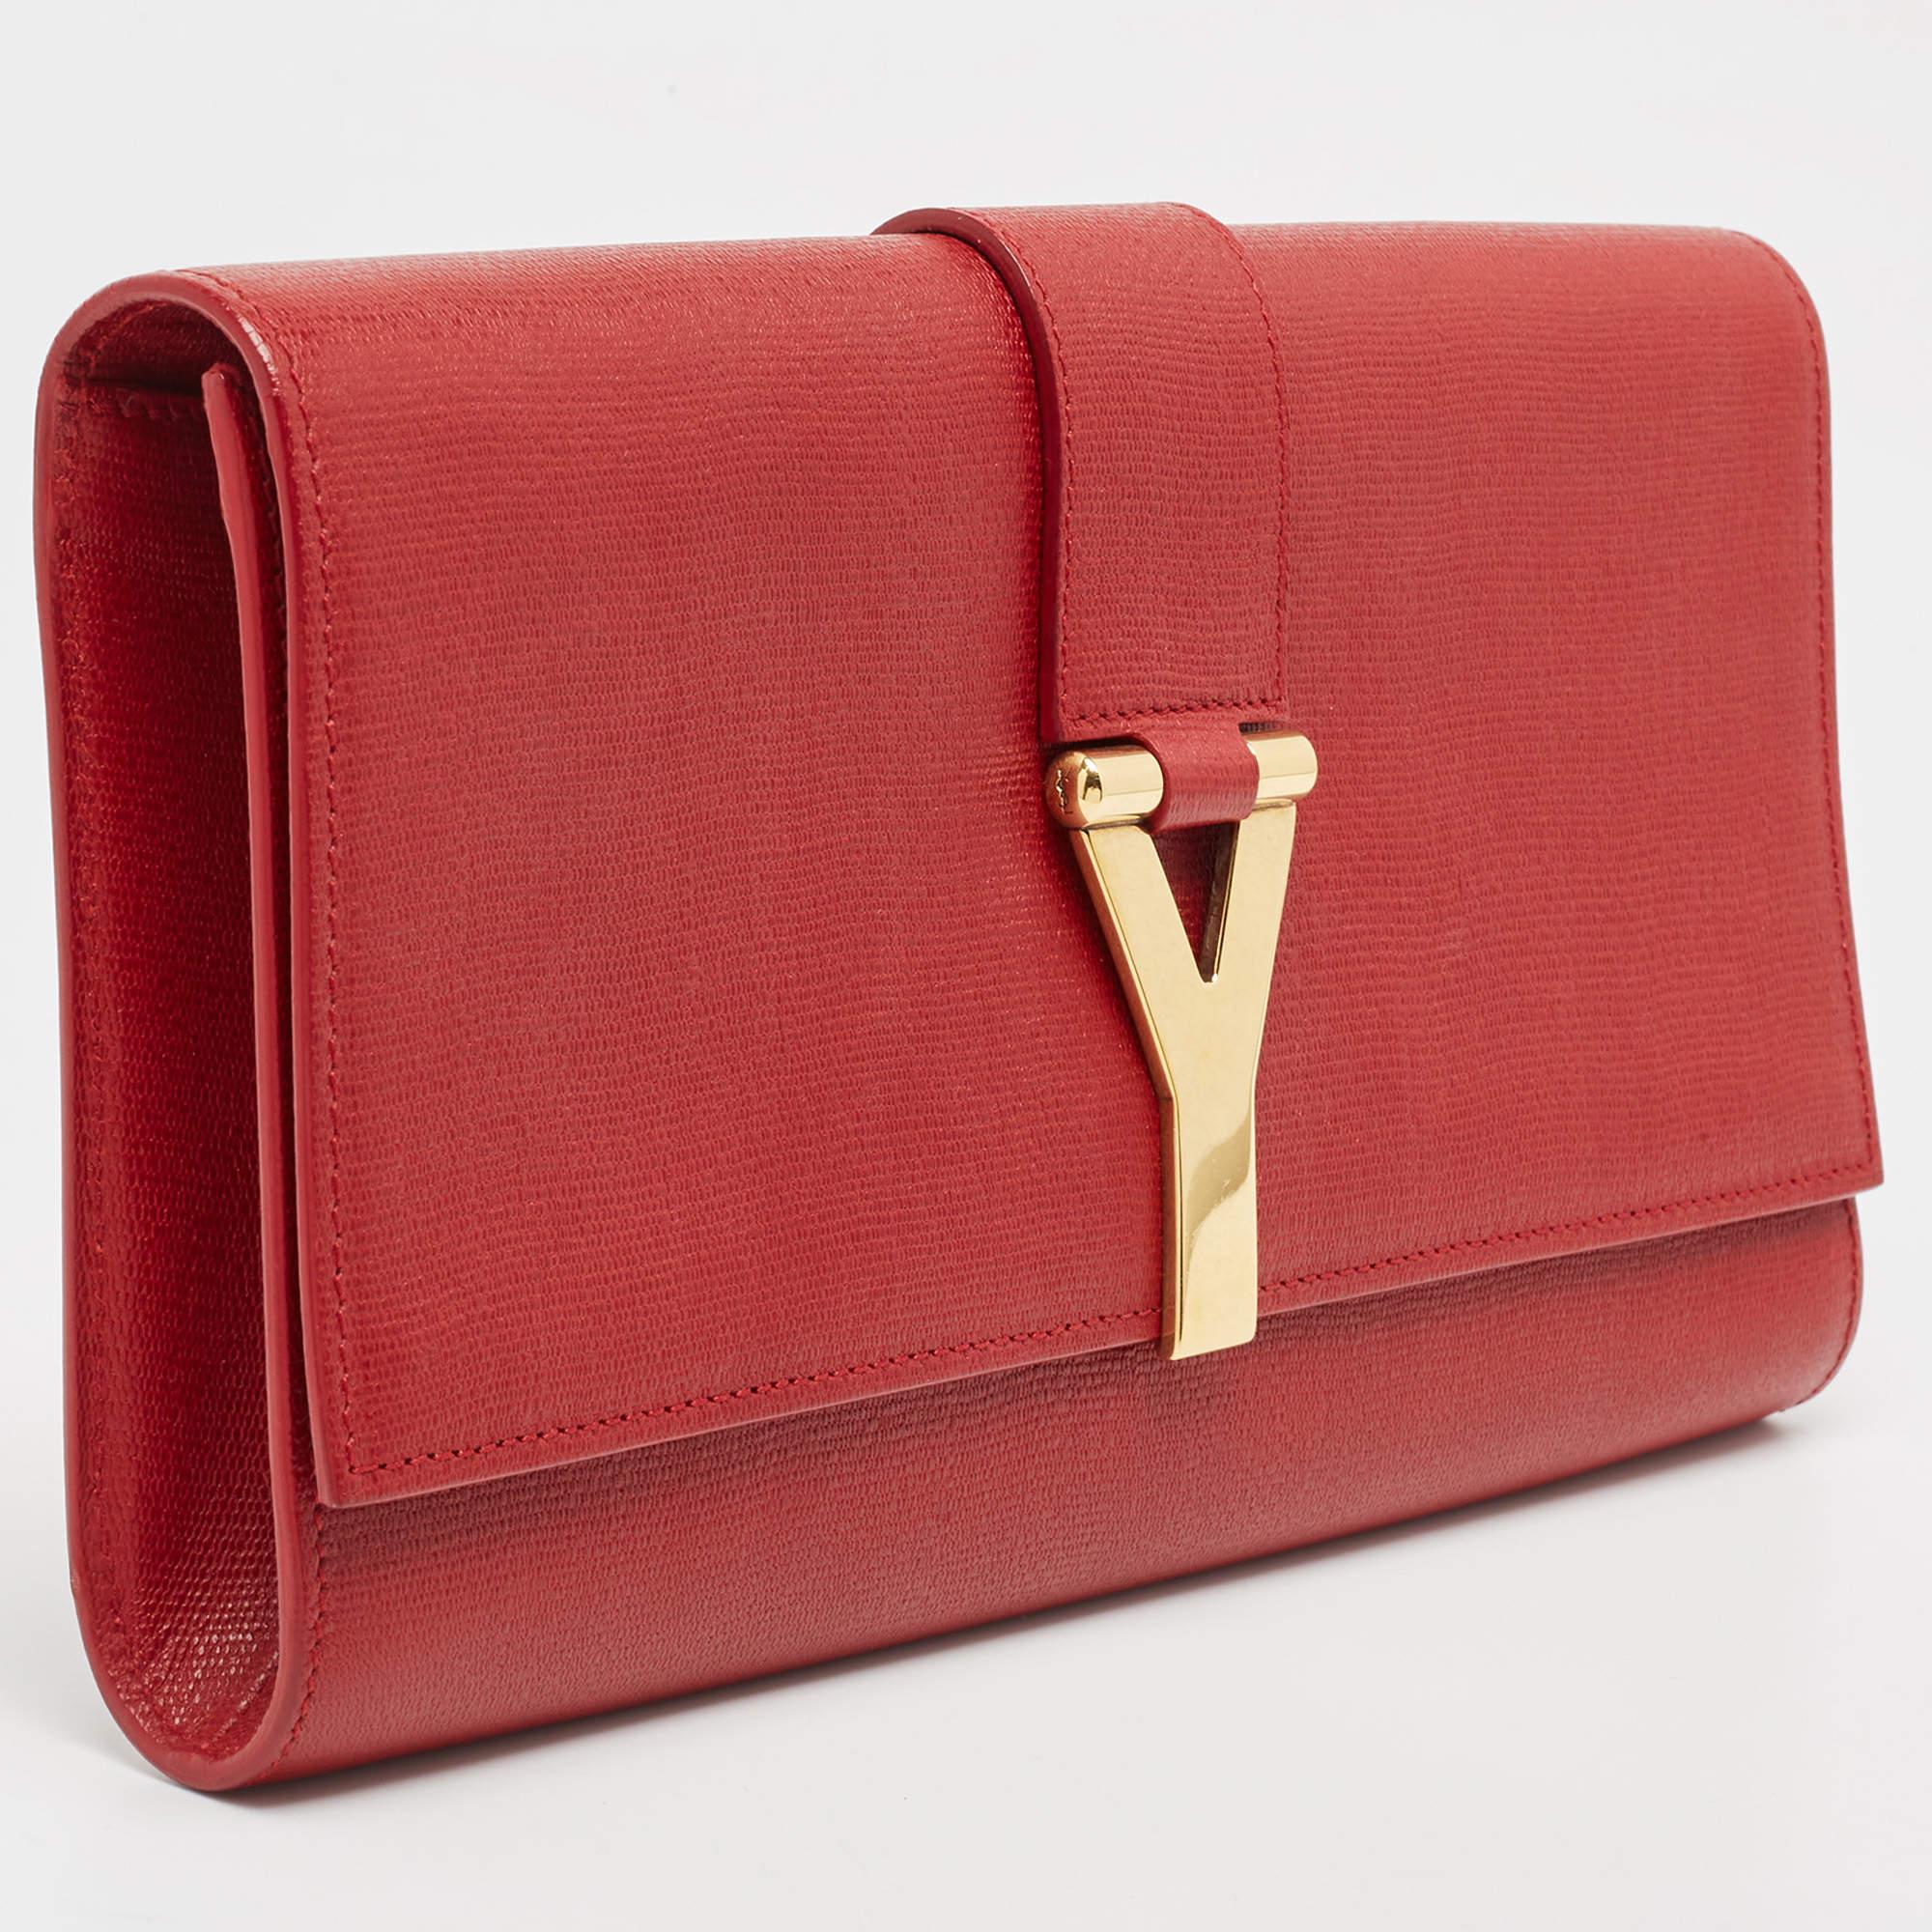 Yves Saint Laurent Red Leather Y-Ligne Clutch For Sale 4